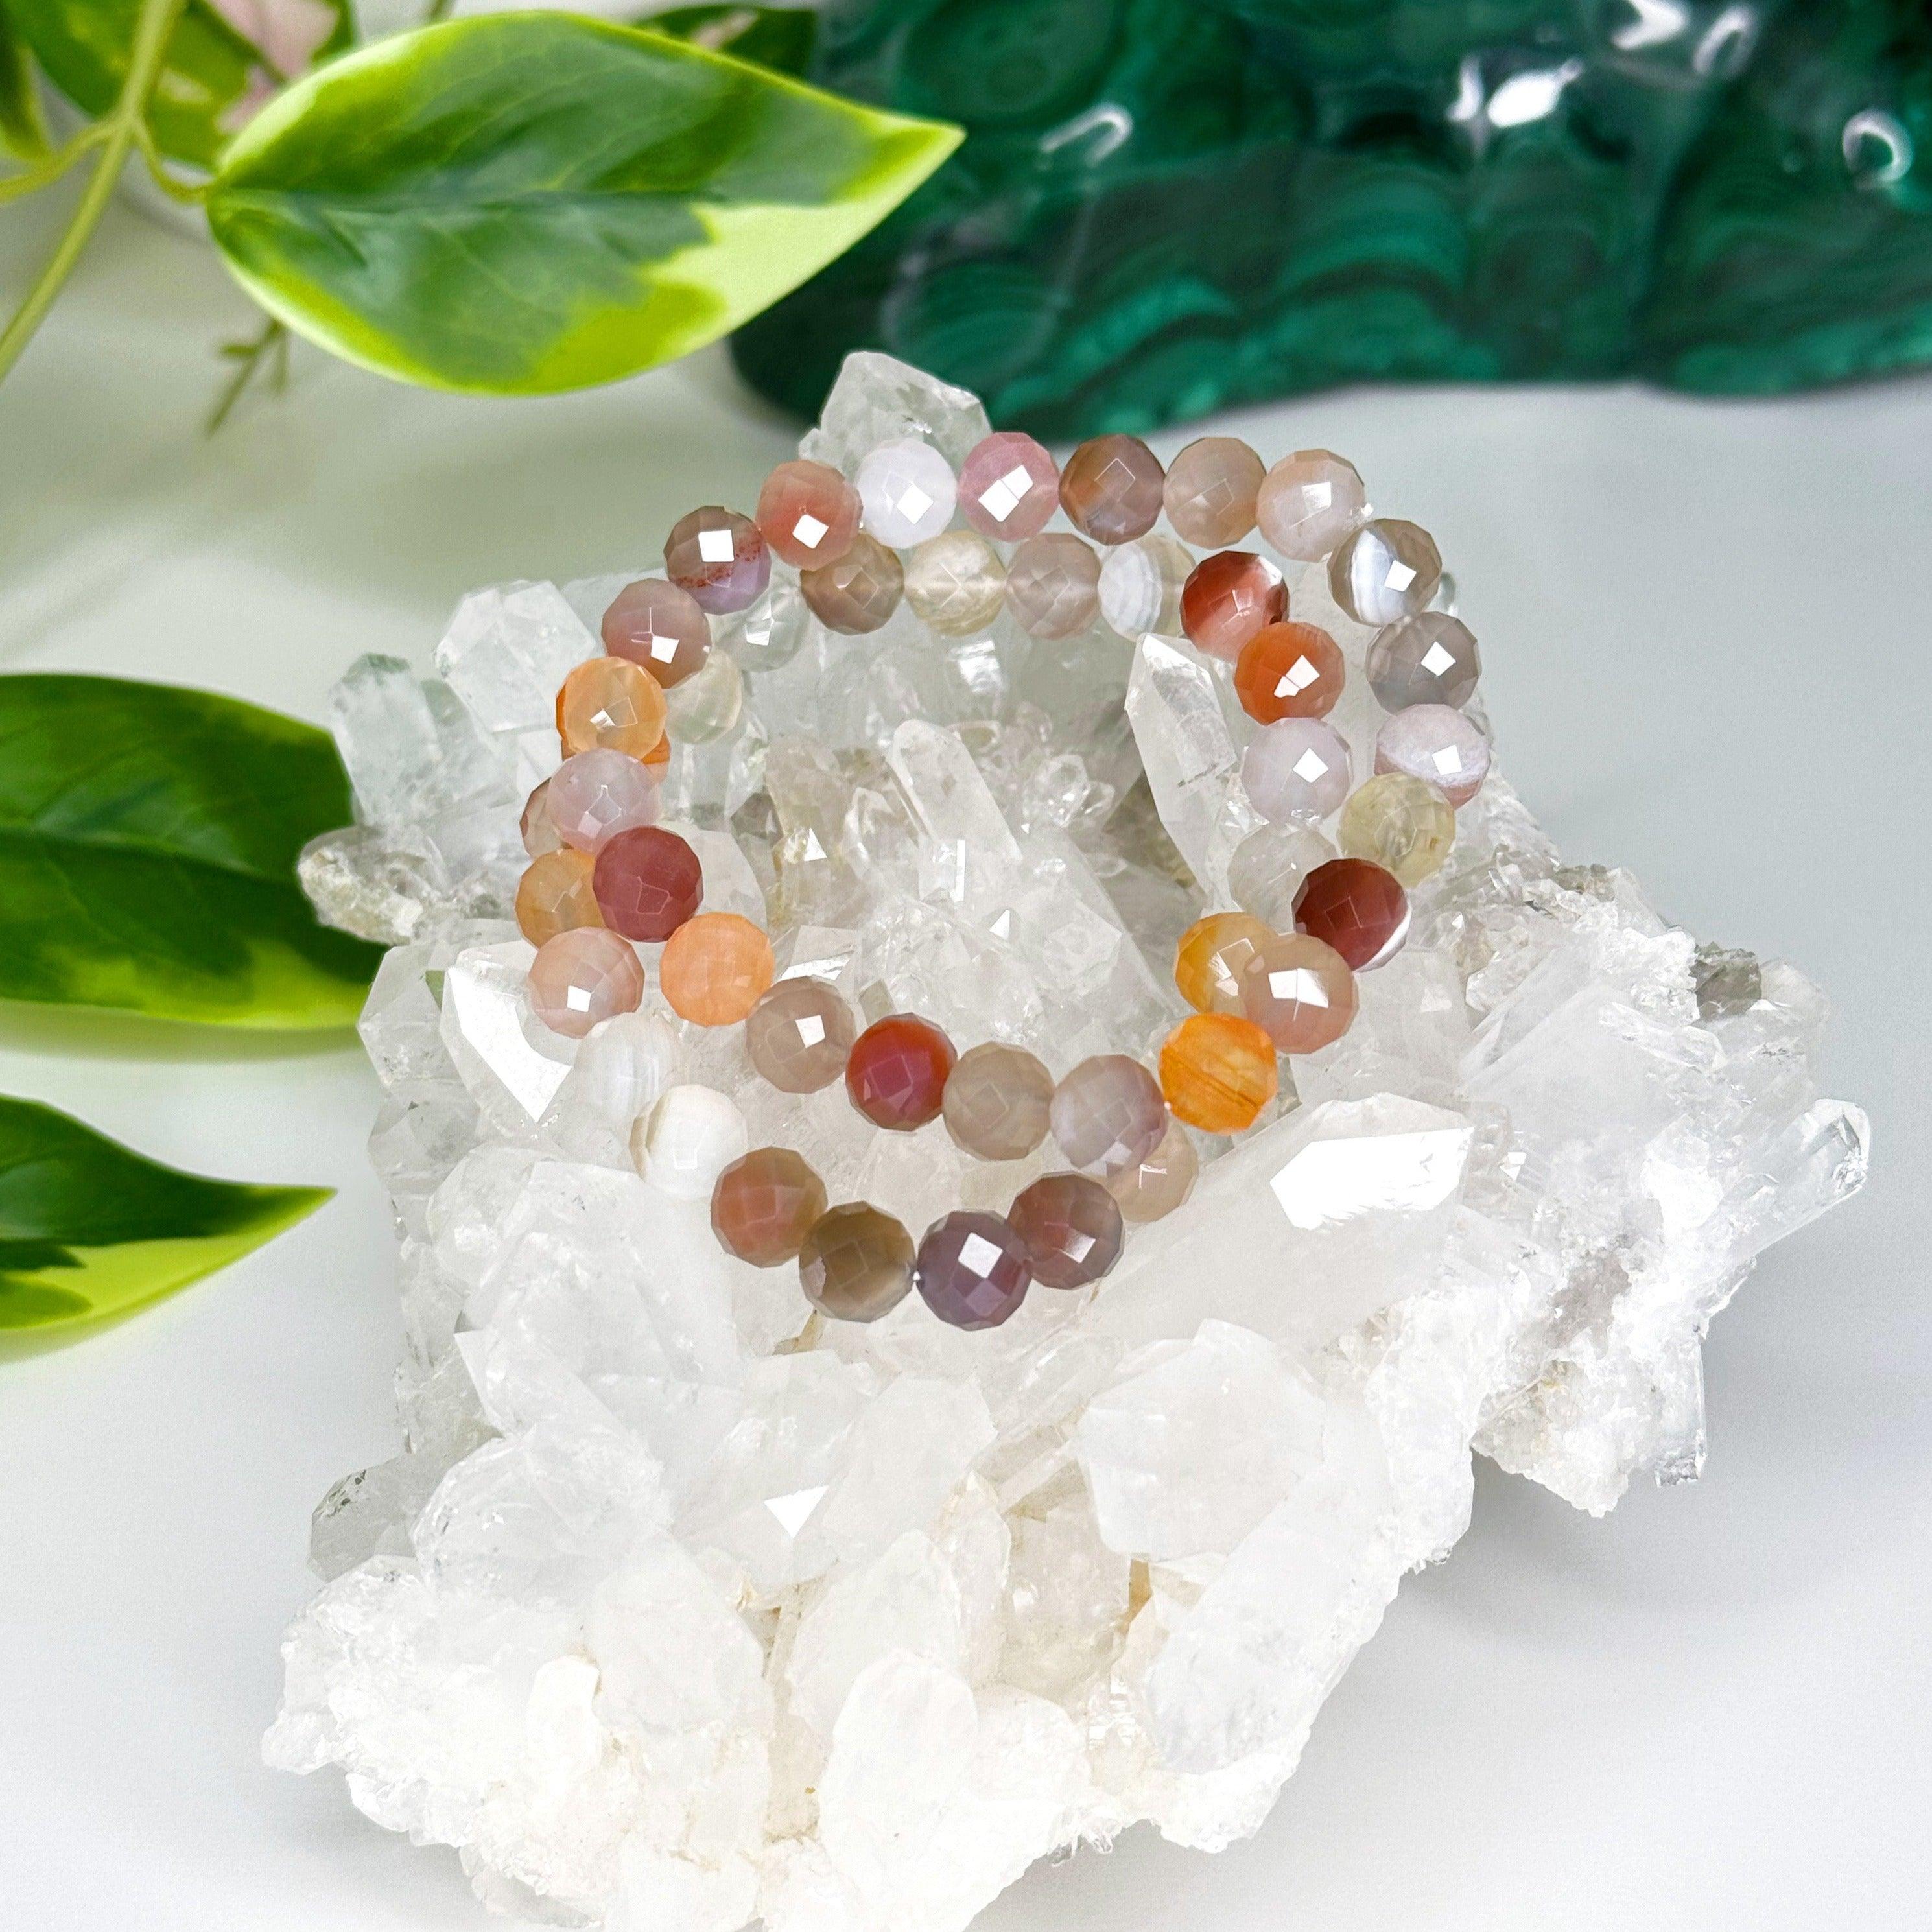 MOZAMBIQUE AGATE (FACETED) 8mm - HANDMADE CRYSTAL BRACELET - 8mm, agate, bracelet, crystal bracelet, emotional support, faceted, fire, gemini, gemini stack, handmade bracelet, jewelry, market bracelet, mixed colors, mozambique agate, recently added, solstice collection, Wearable, winter solstice collection - The Mineral Maven